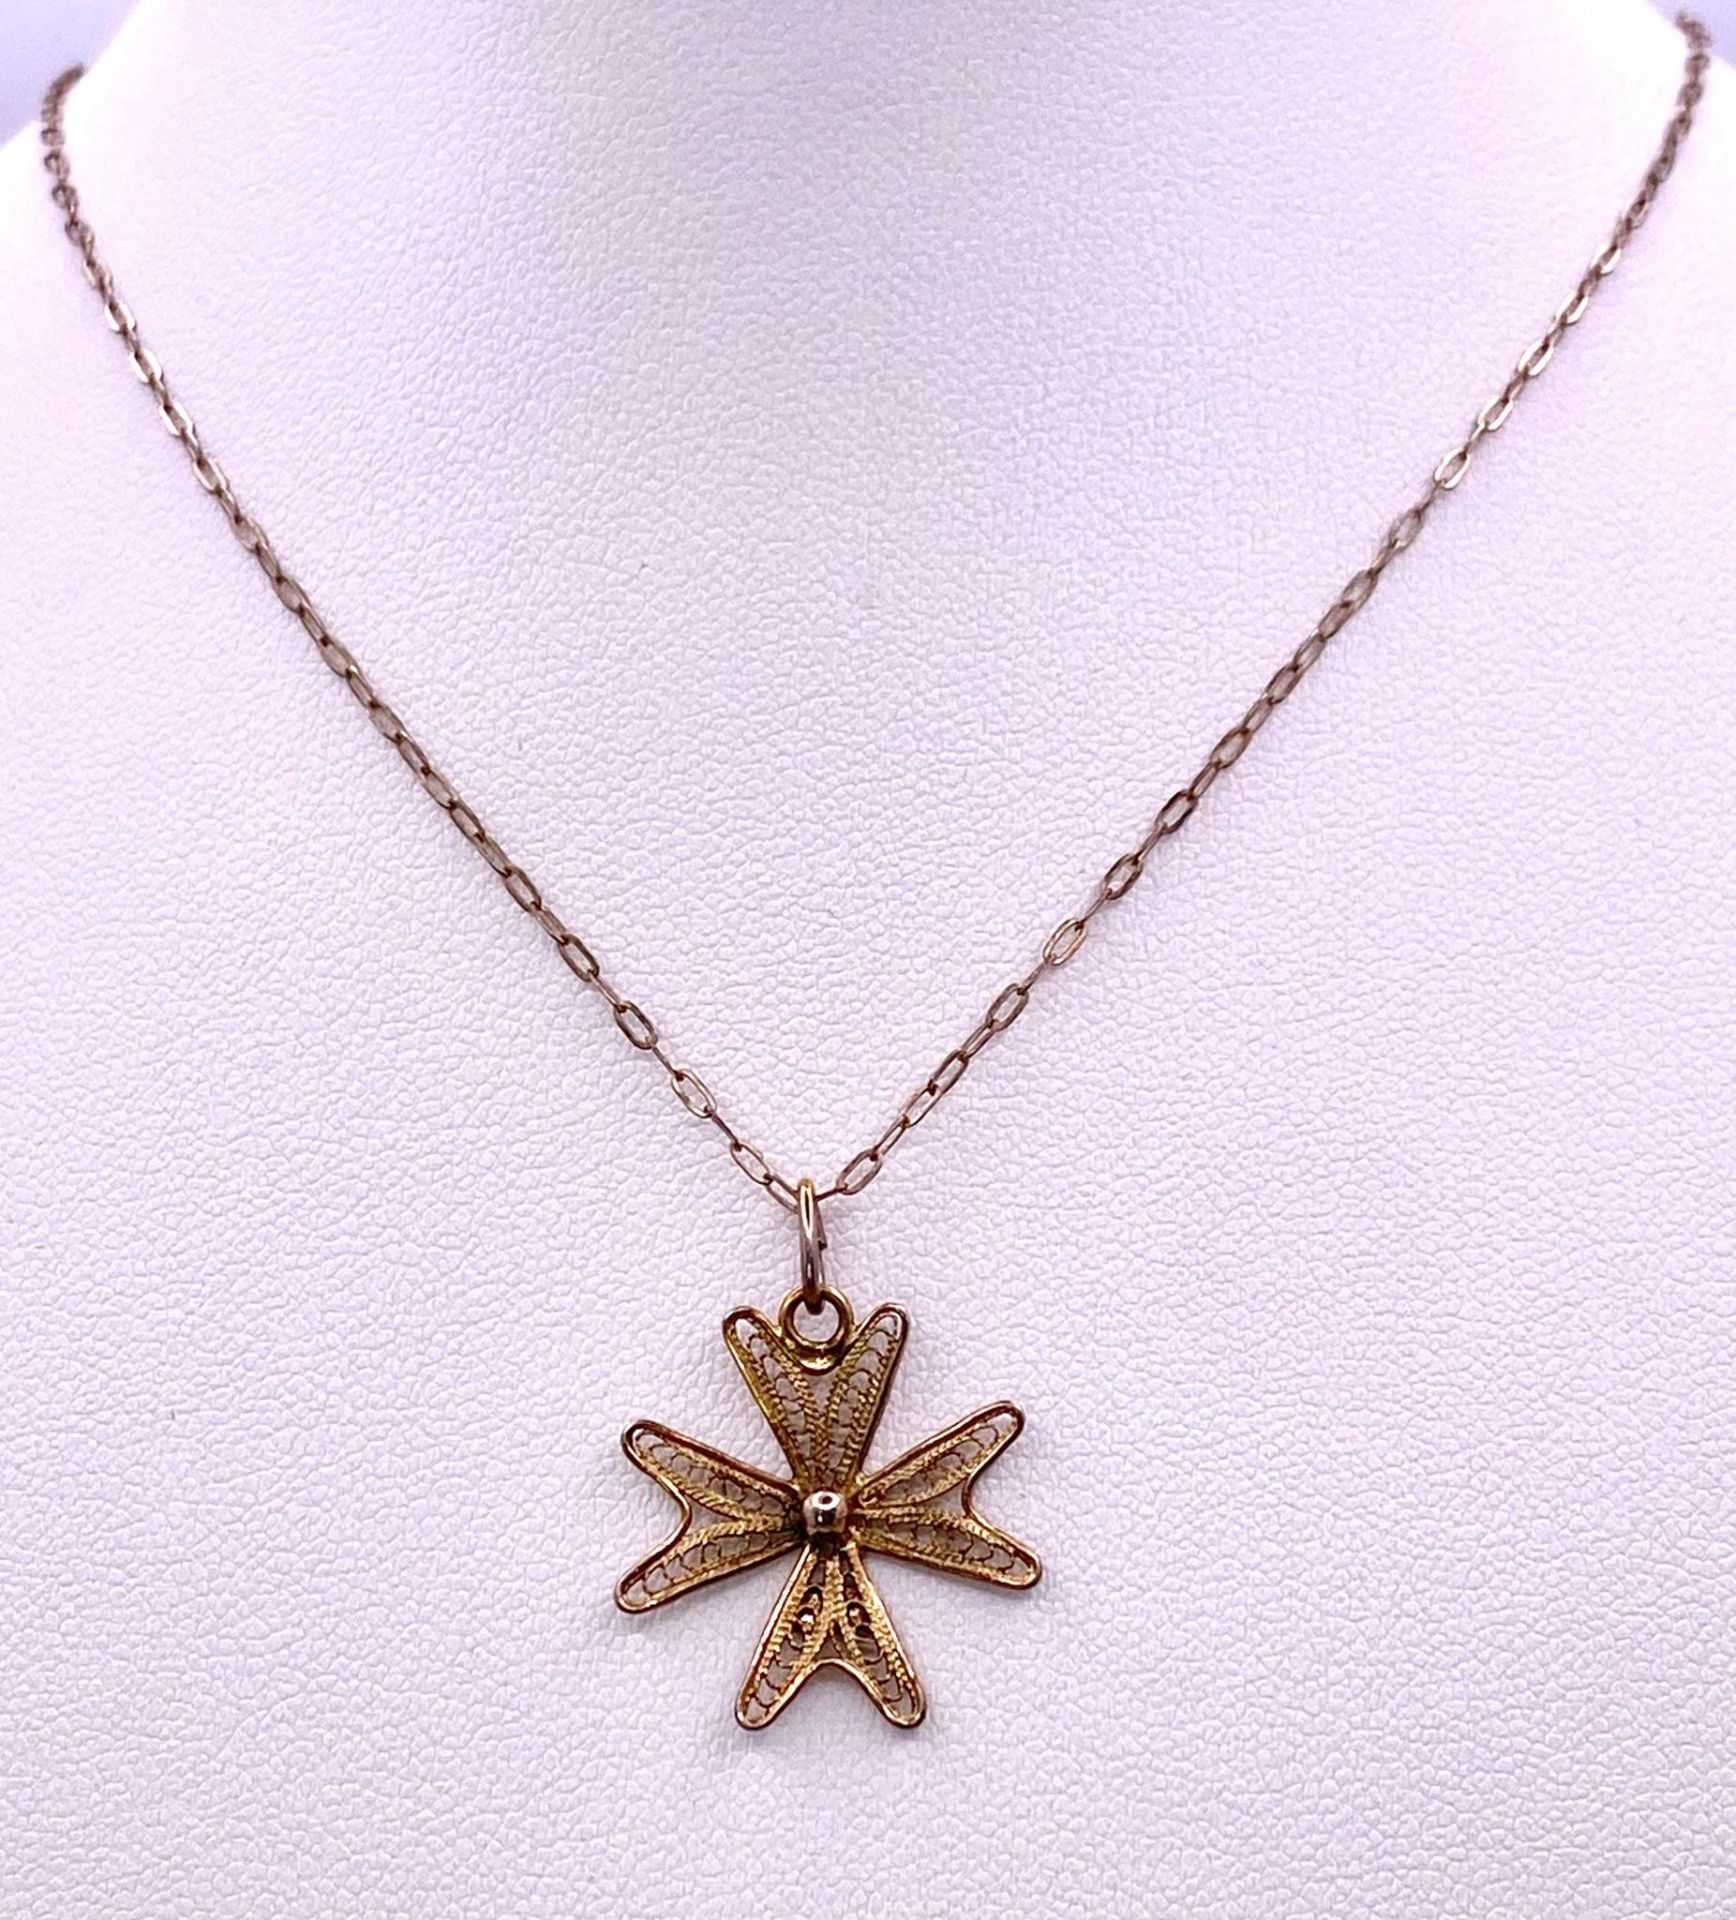 A 925 gilded silver Filigree Maltese cross pendant on silver chain. Total weight 2G. Total length